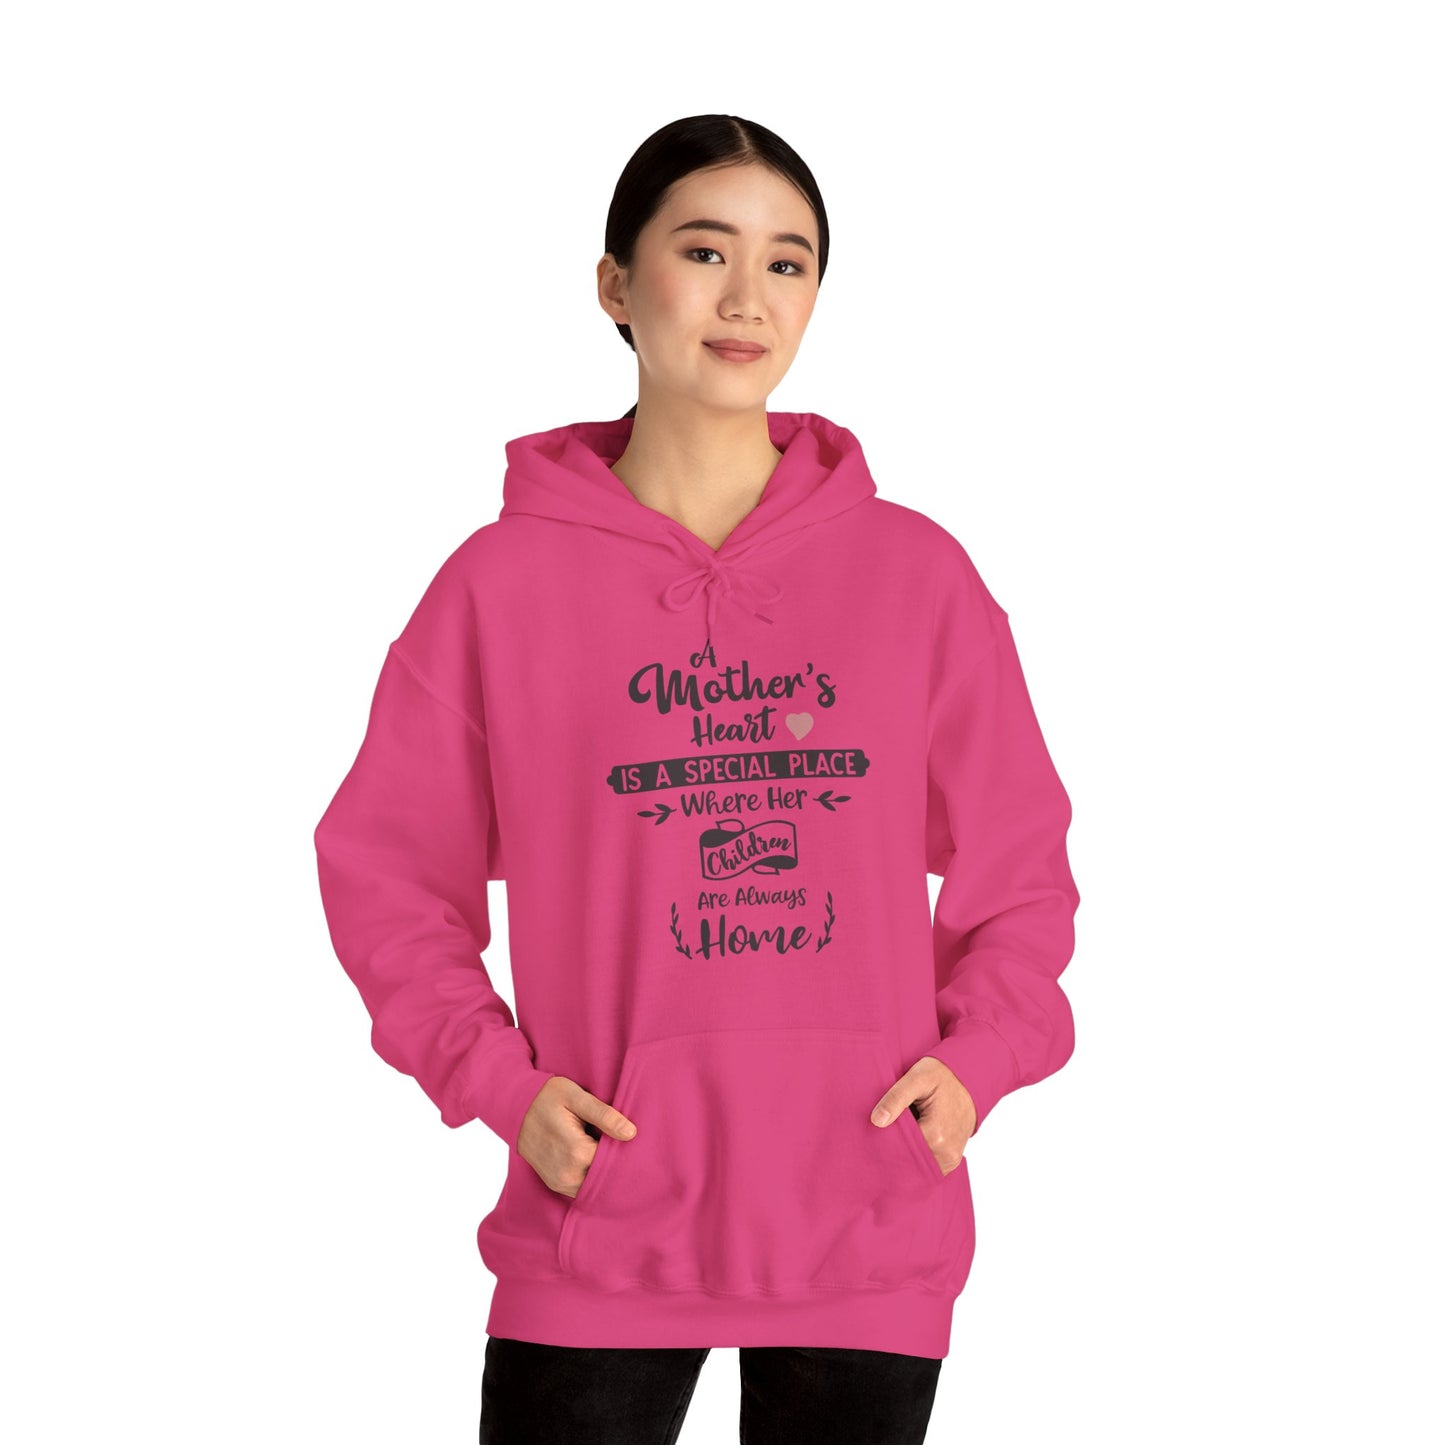 A Mother's heart is a special place - Unisex Heavy Blend™ Hooded Sweatshirt